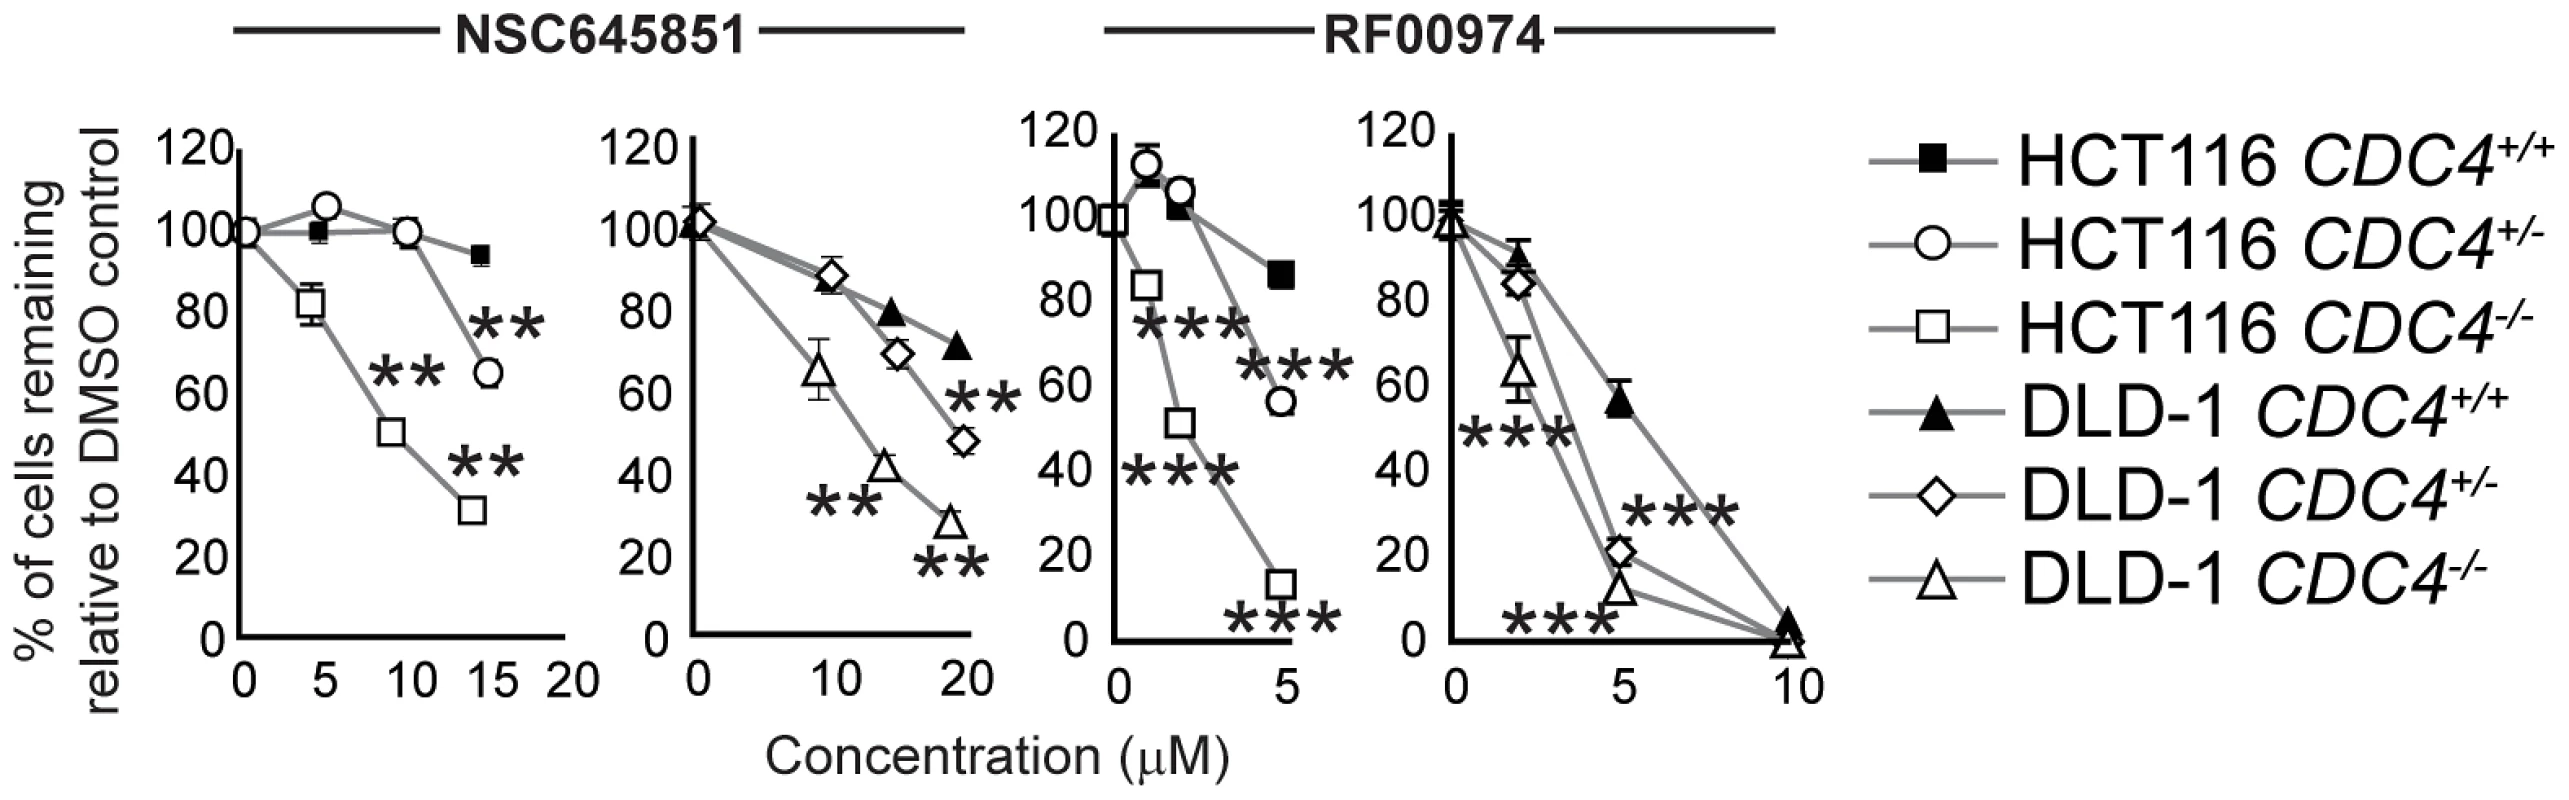 NSC645851 and RF00974 selectively inhibit the proliferation of HCT116 and DLD-1 cells with both homozygous and heterozygous inactivating mutations of <i>CDC4</i>.